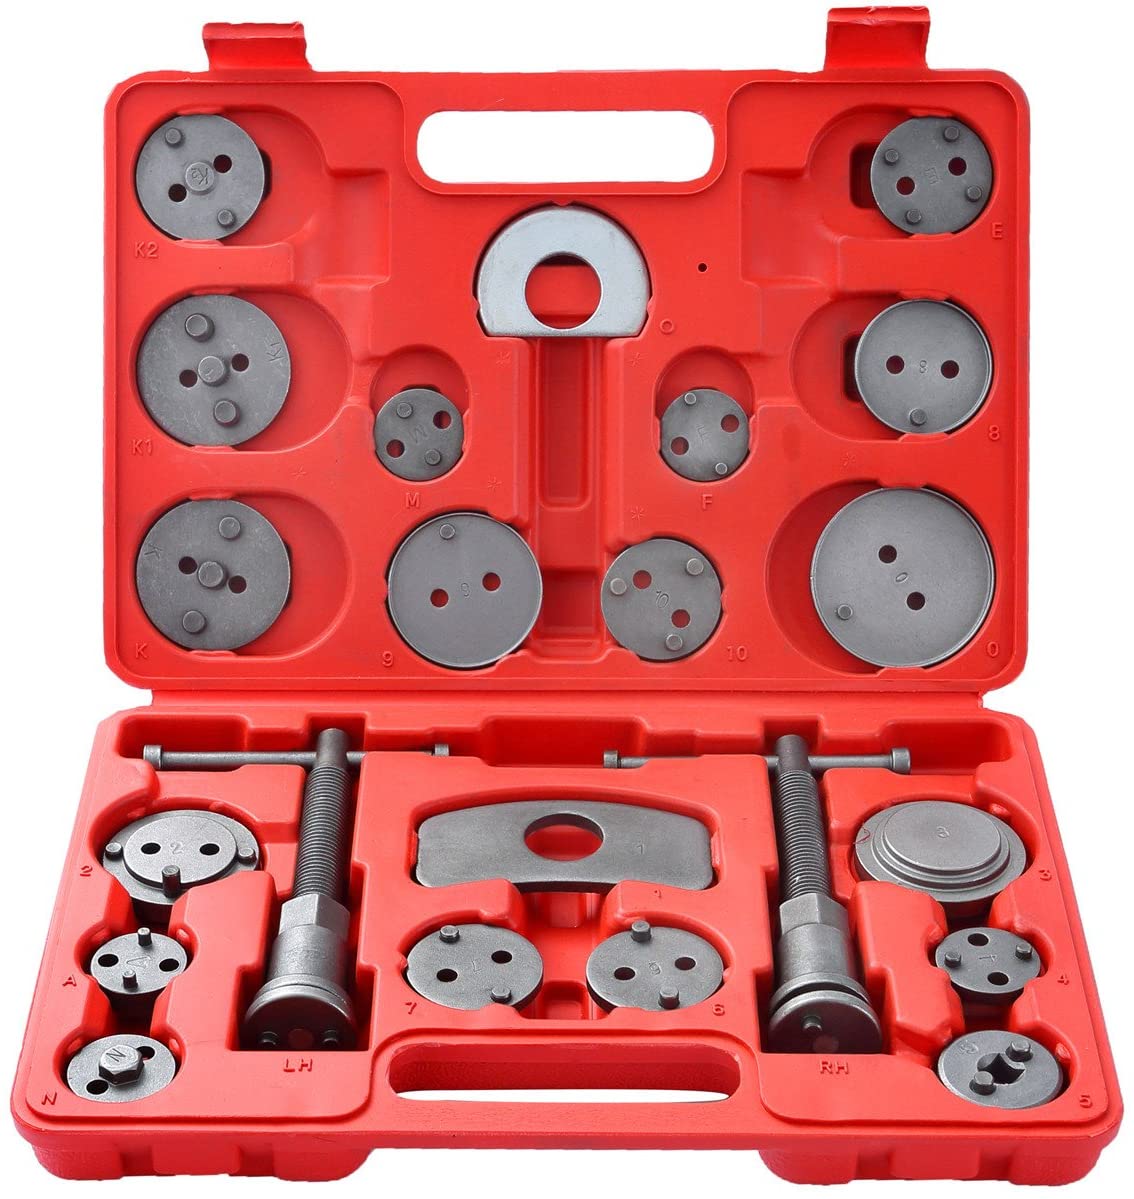 Brake Caliper Rewind Tool Kit to Wind Back Front and Rear Disc Brake Piston Compression Pad Replacement 24pcs Master Set with One Pair of Glove